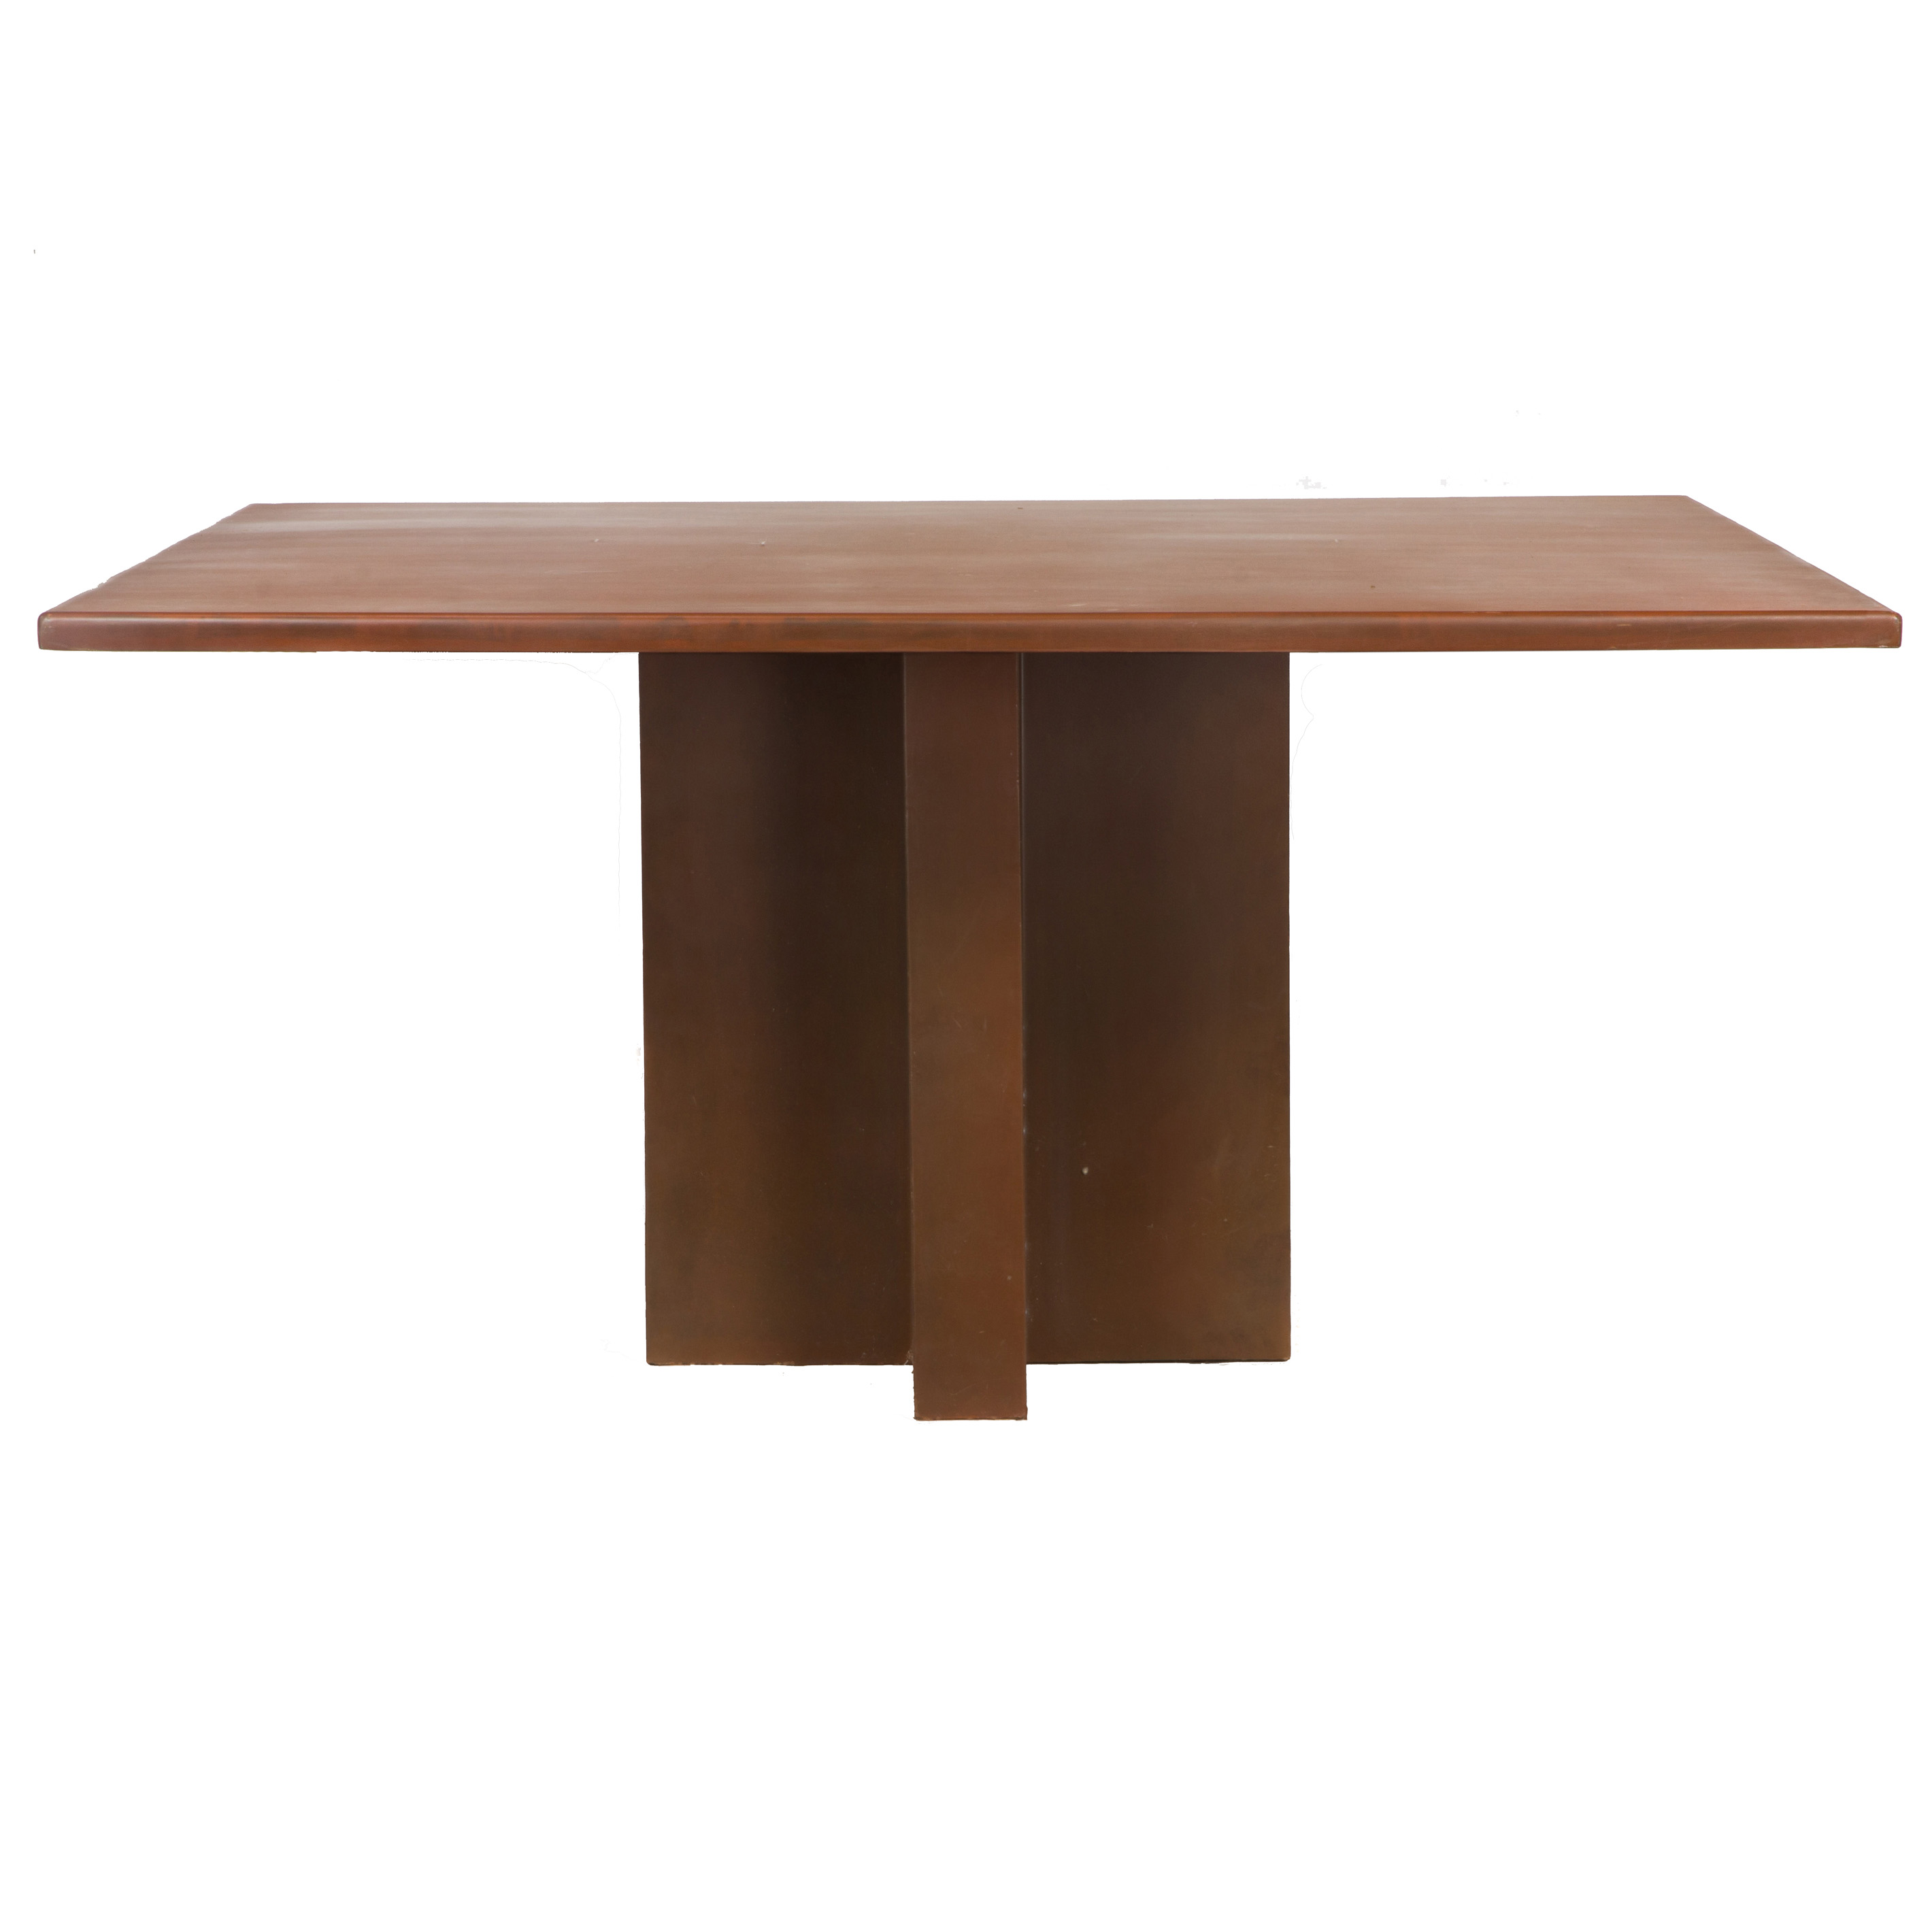 A JACK A. CHANDLER "CROSS" TABLE